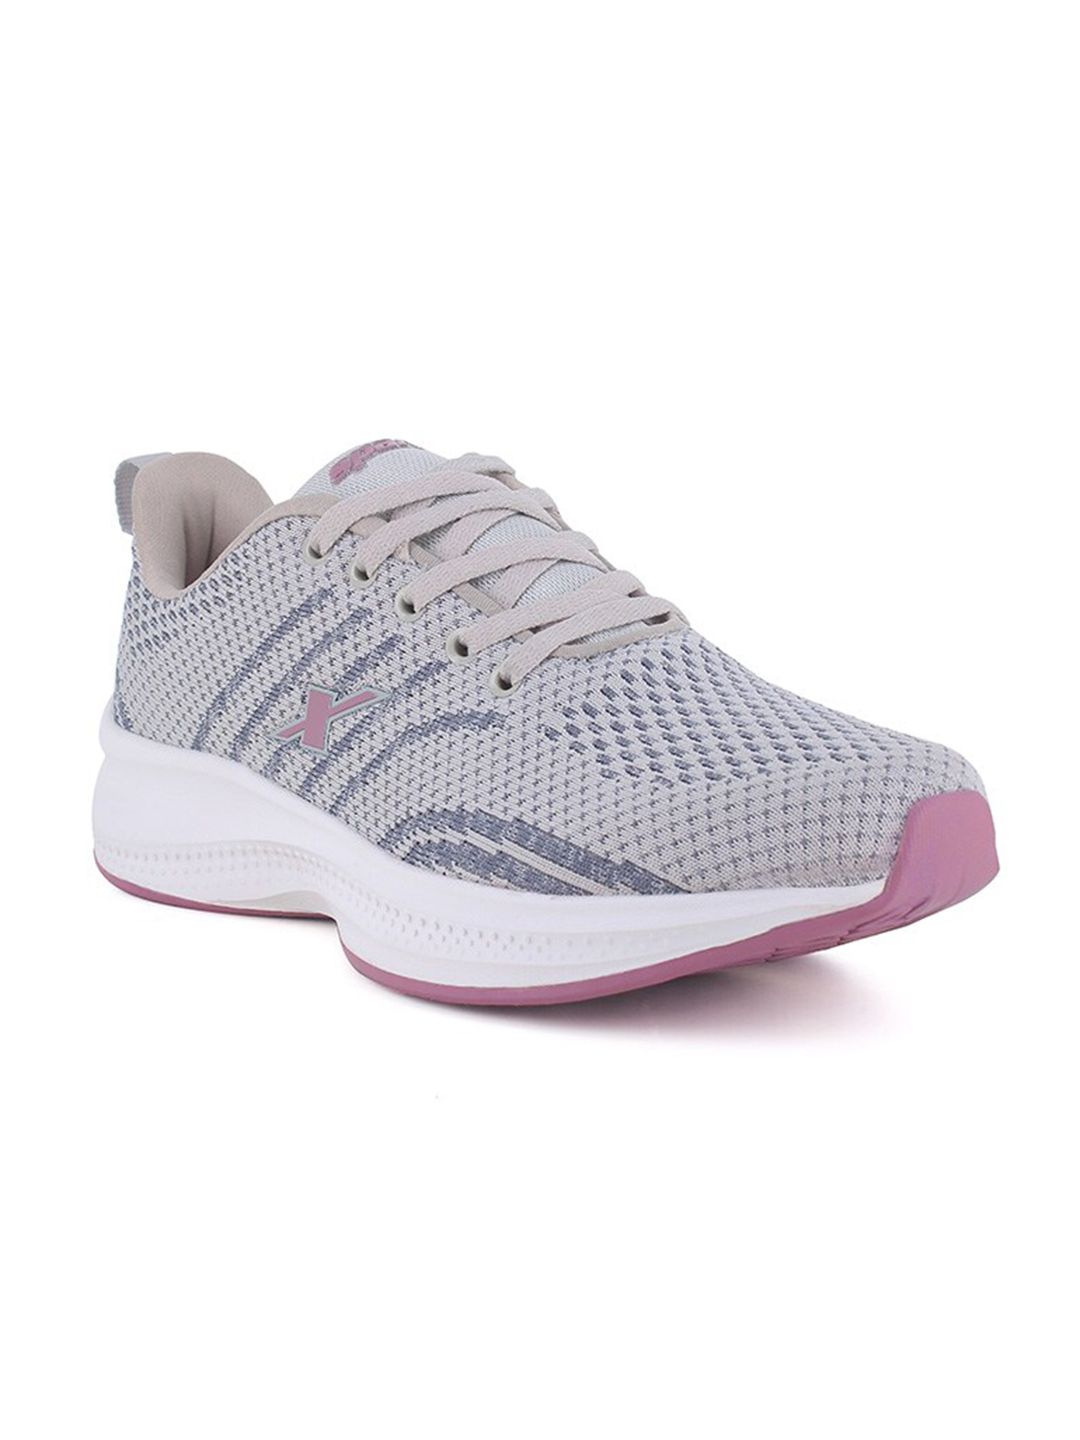 Sparx Women Grey Textile Running Non-Marking Shoes Price in India